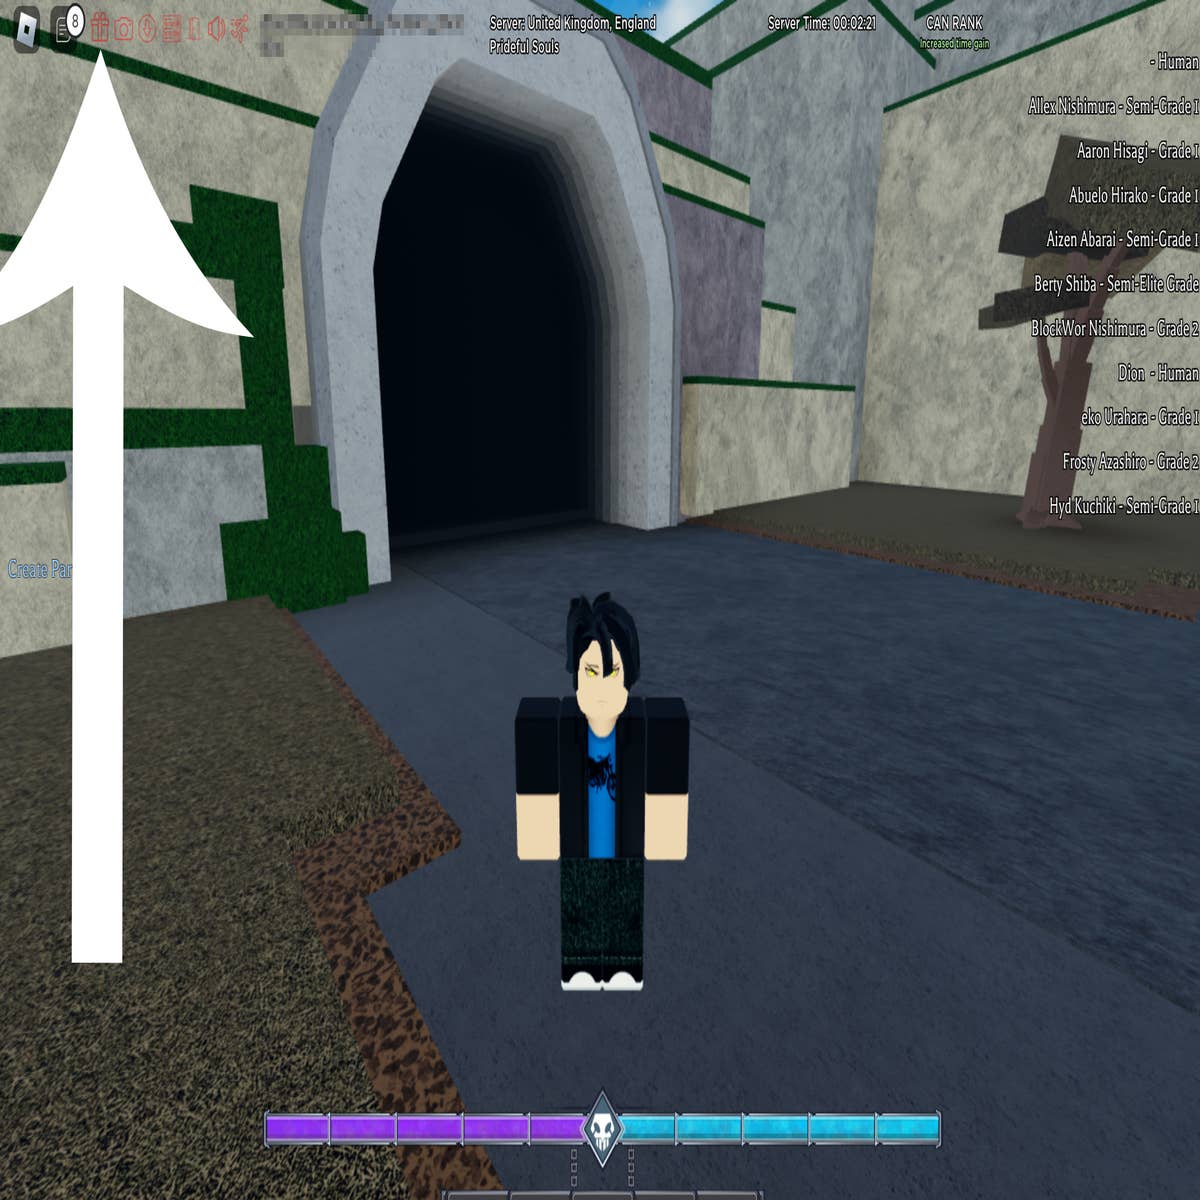 ALL NEW *SECRET* CODES in SOUL WAR CODES! (Roblox Soul